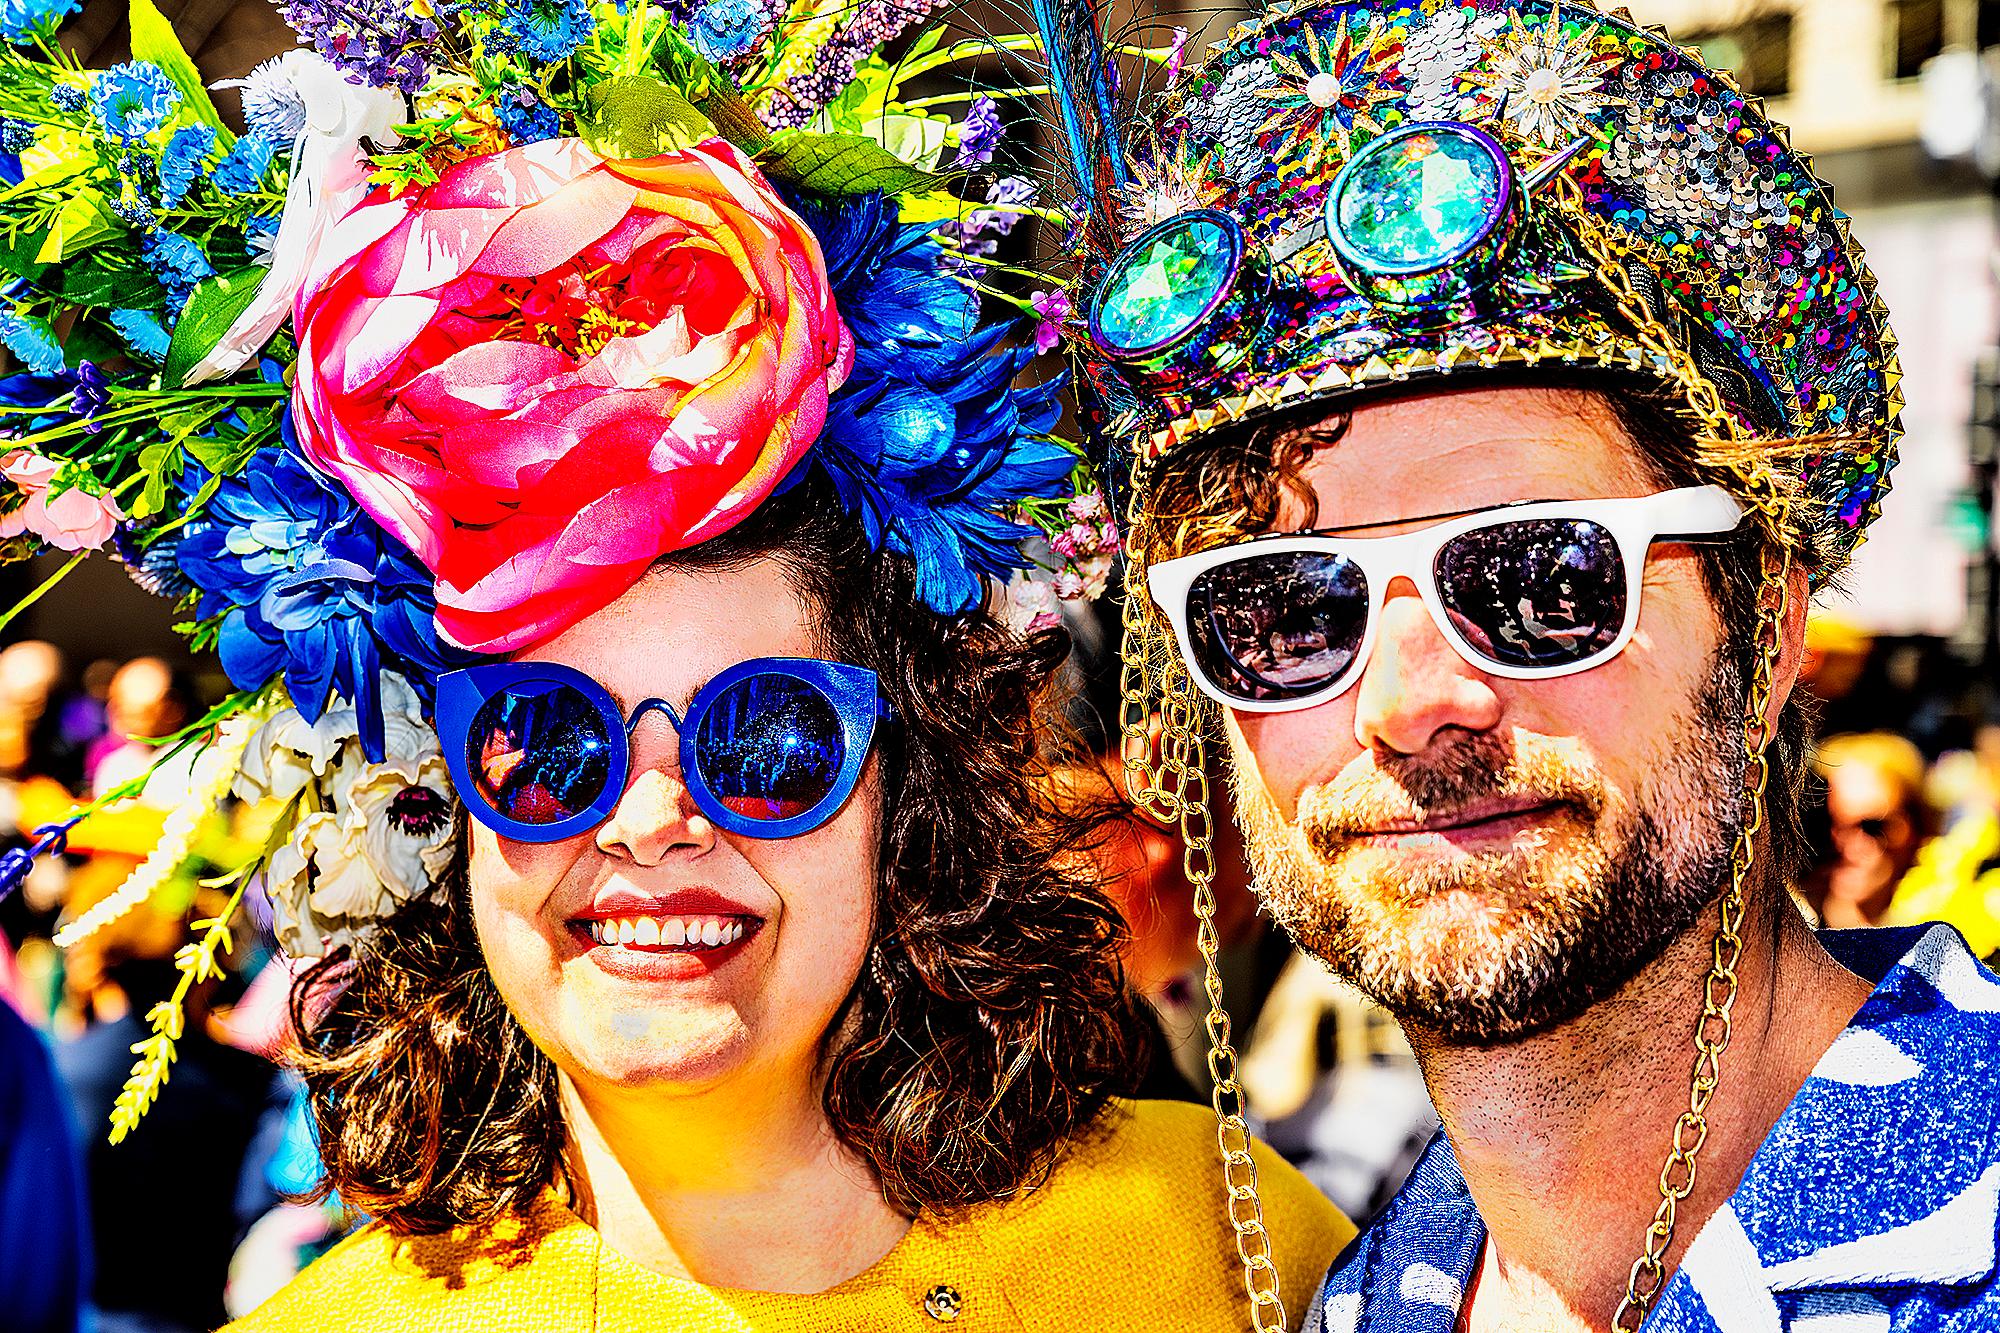 Mitchell Funk Portrait Photograph - Outrageous Flowers  Colorful Hats at Easter Parade